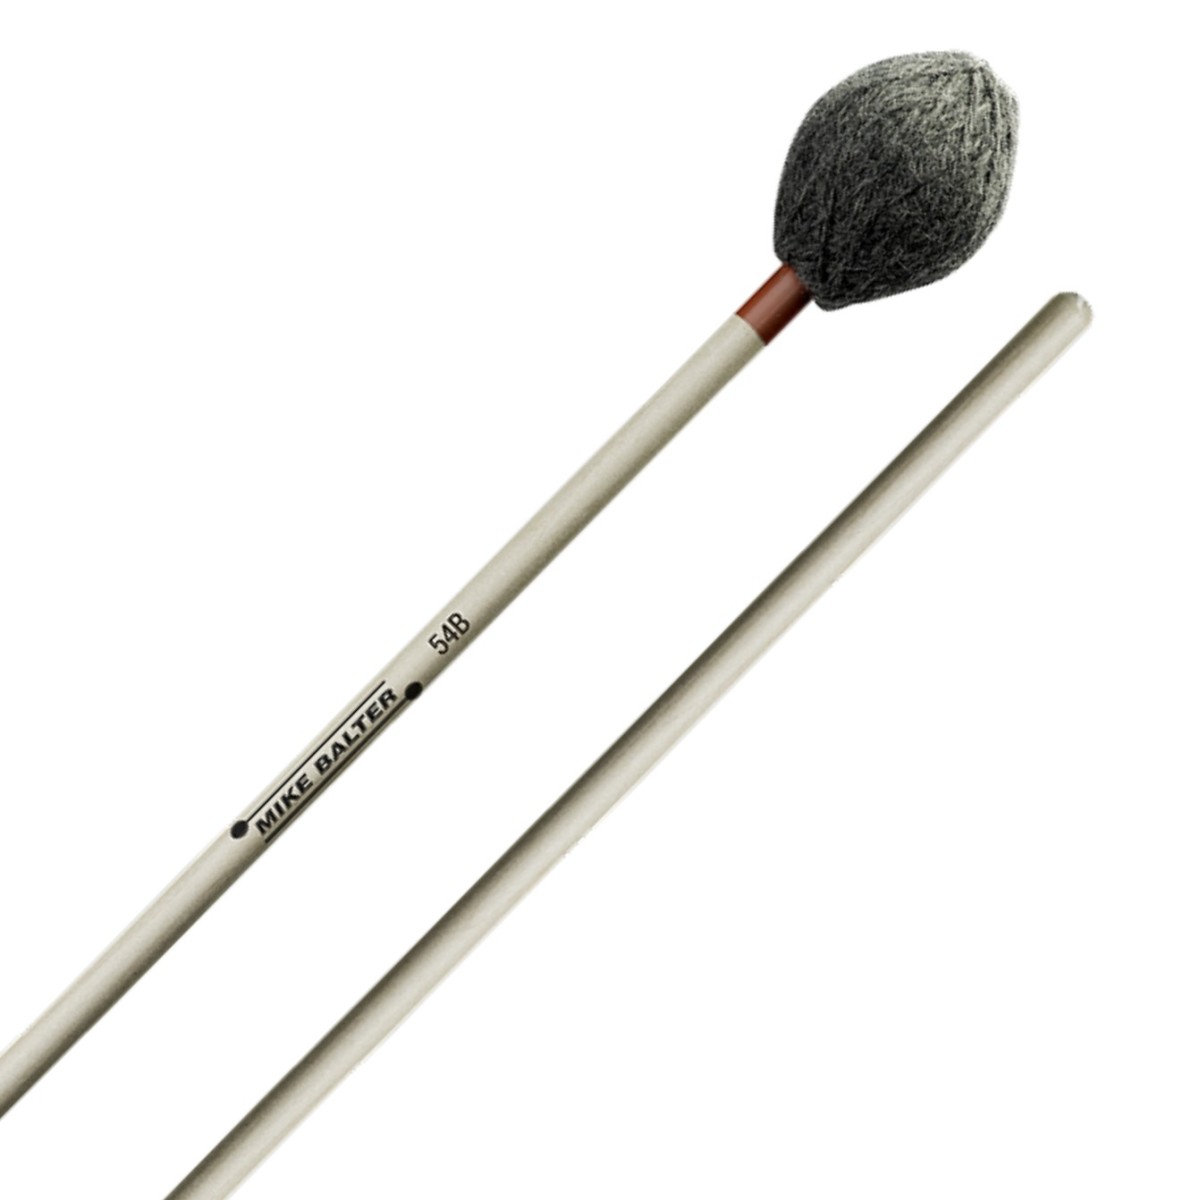 Balter 54 Performing Artist Series Soft Marimba Mallets - DISCONTINUED - last few pairs!